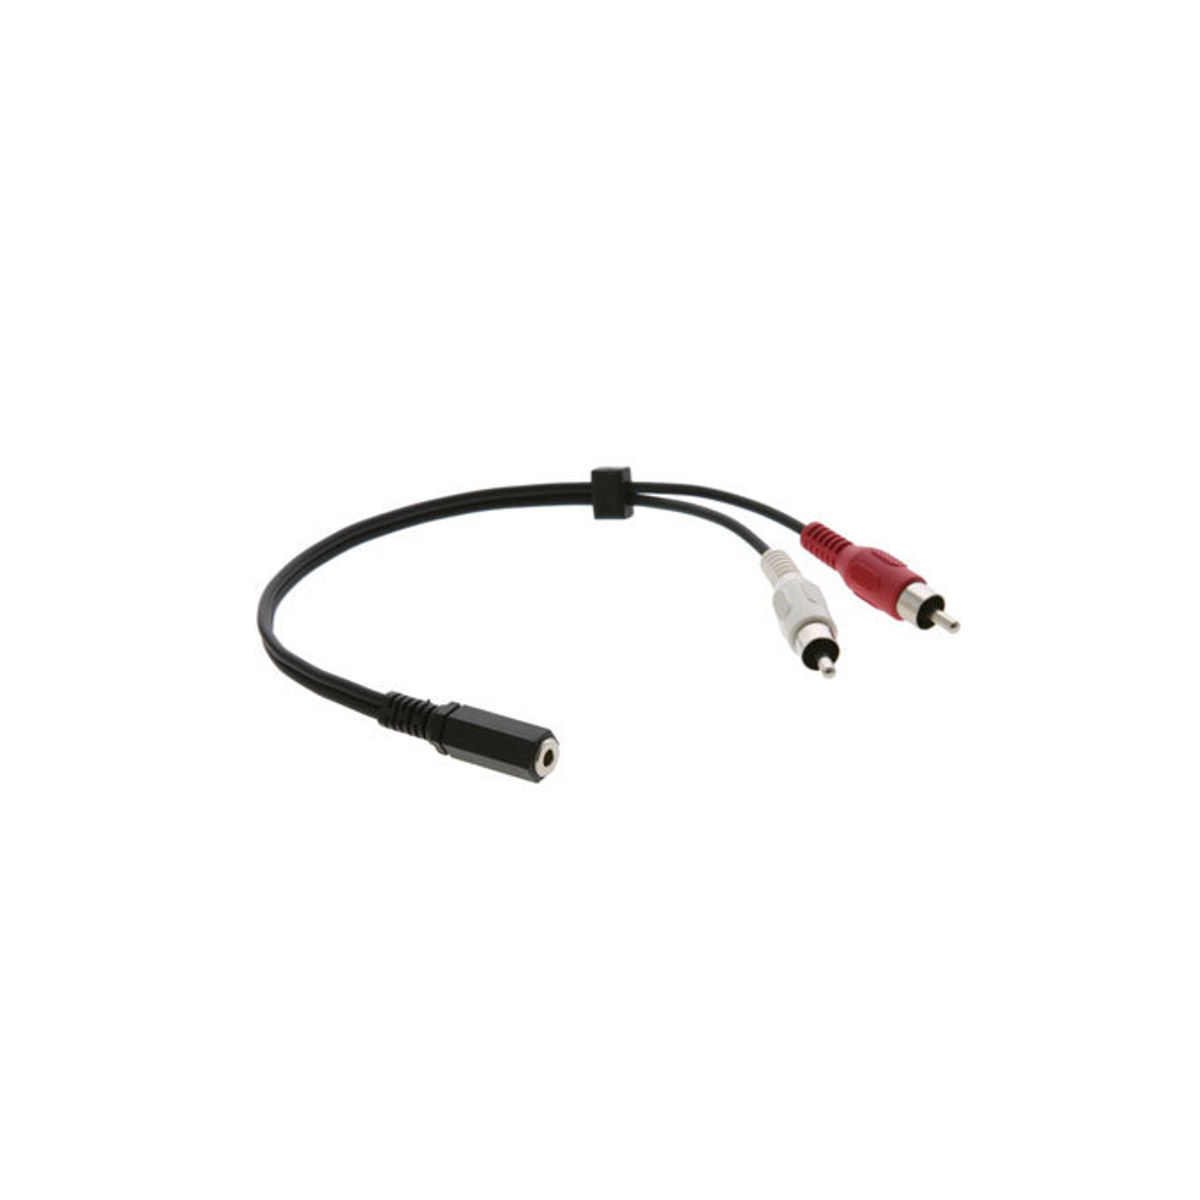 3.5mm to 2 RCA Breakout Cable - 1ft